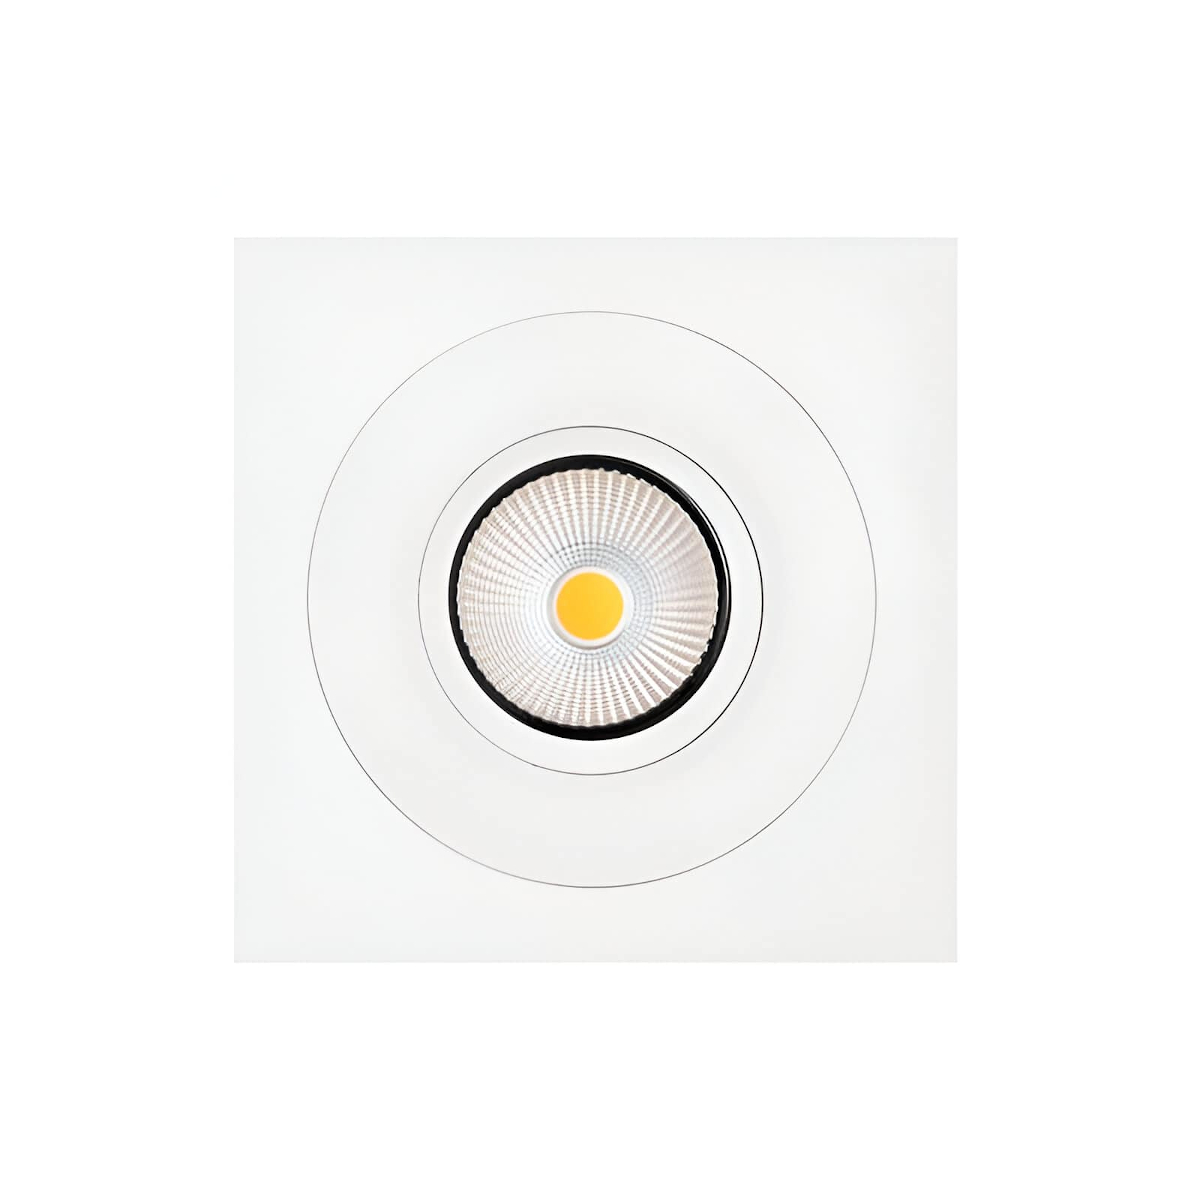 Product image of Zela square white adapter plate with downlight inside